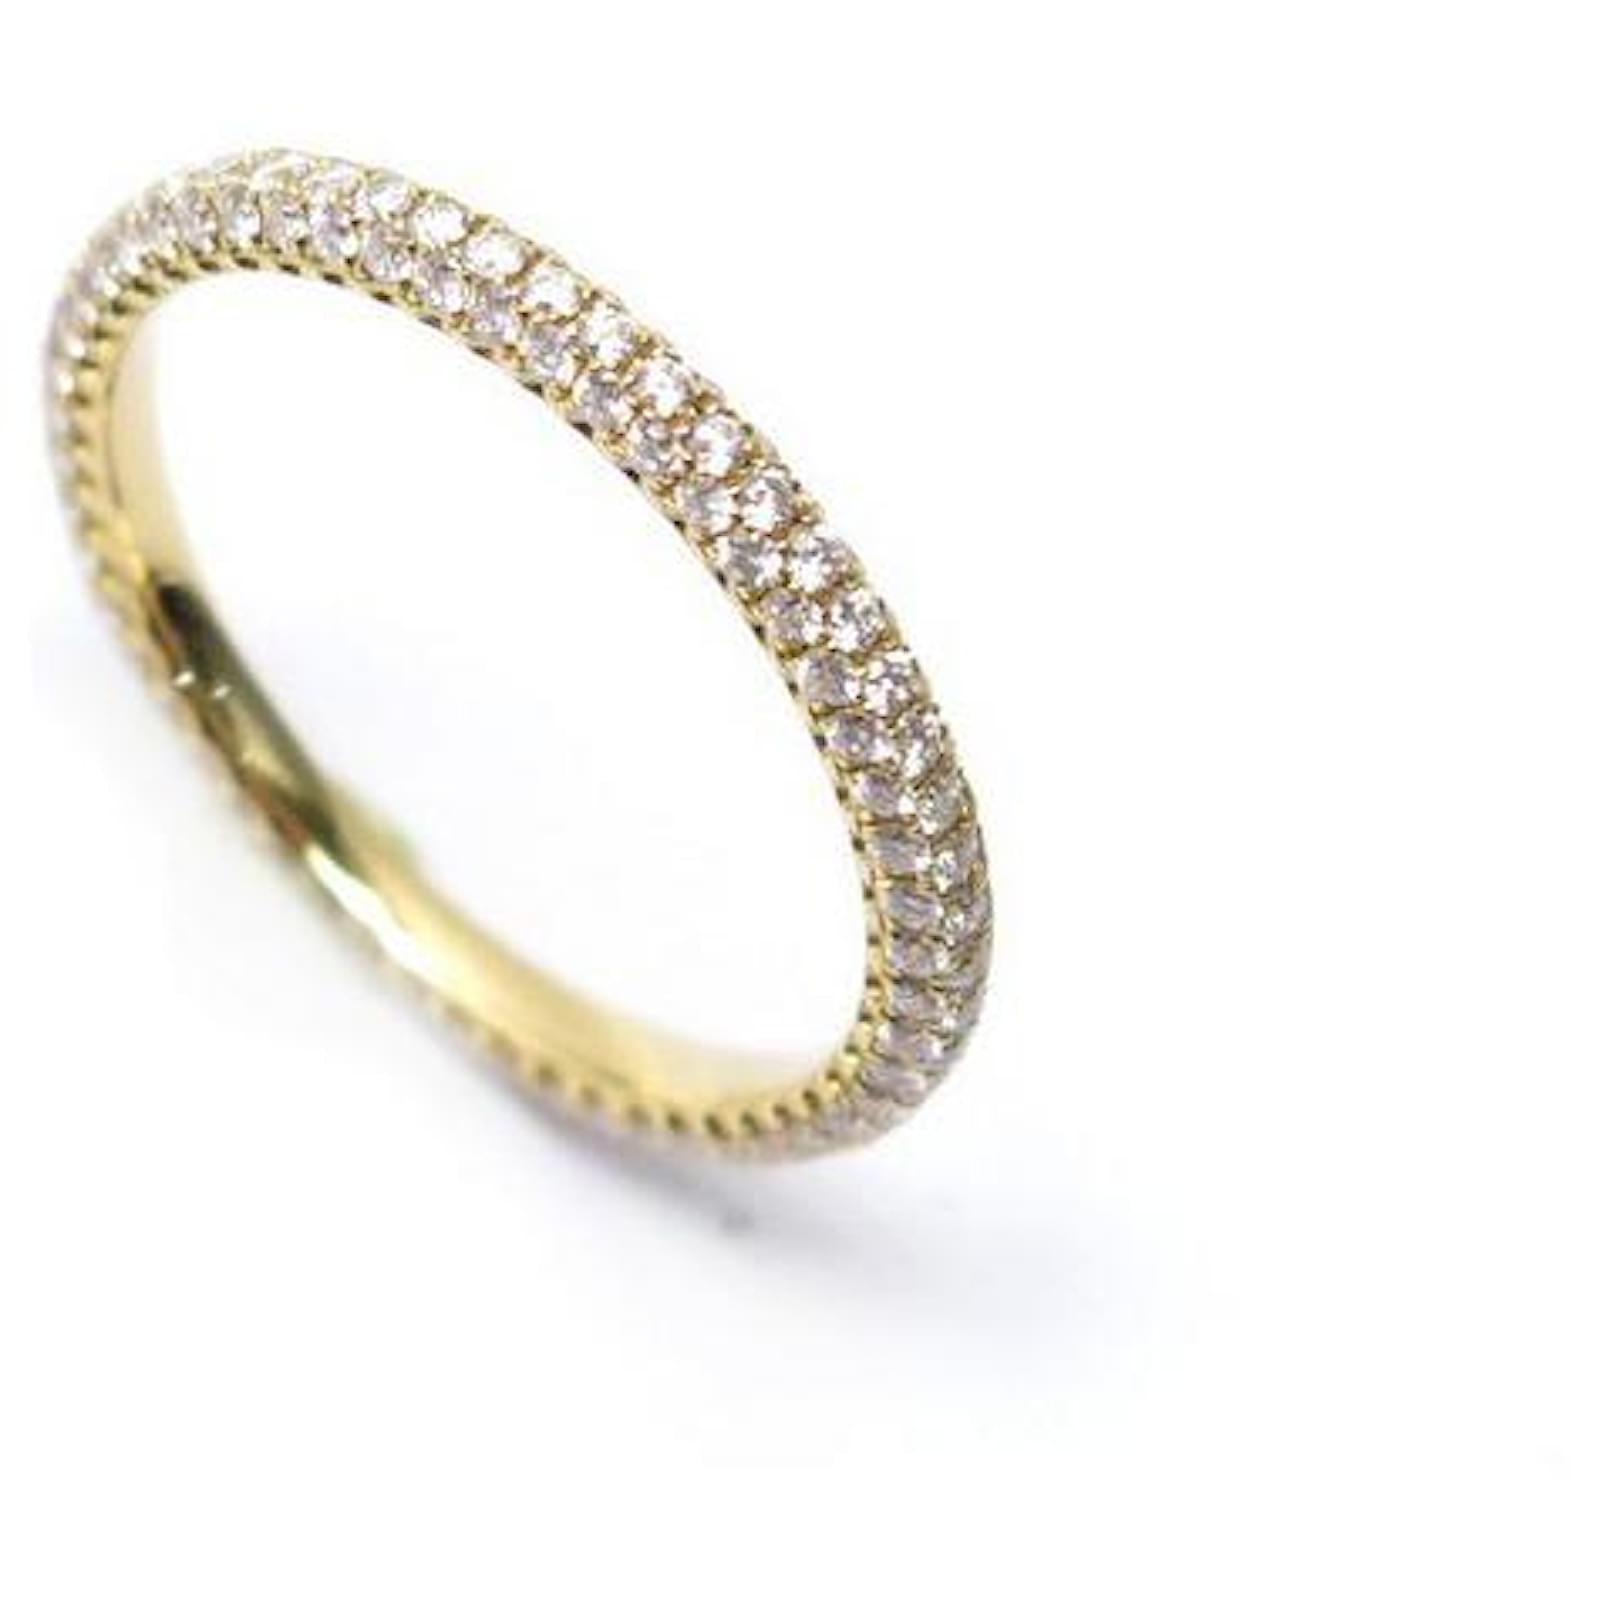 NEW BOUCHERON ALLIANCE EPURE JAL RING01174 T60 in gold and diamonds 3 ...